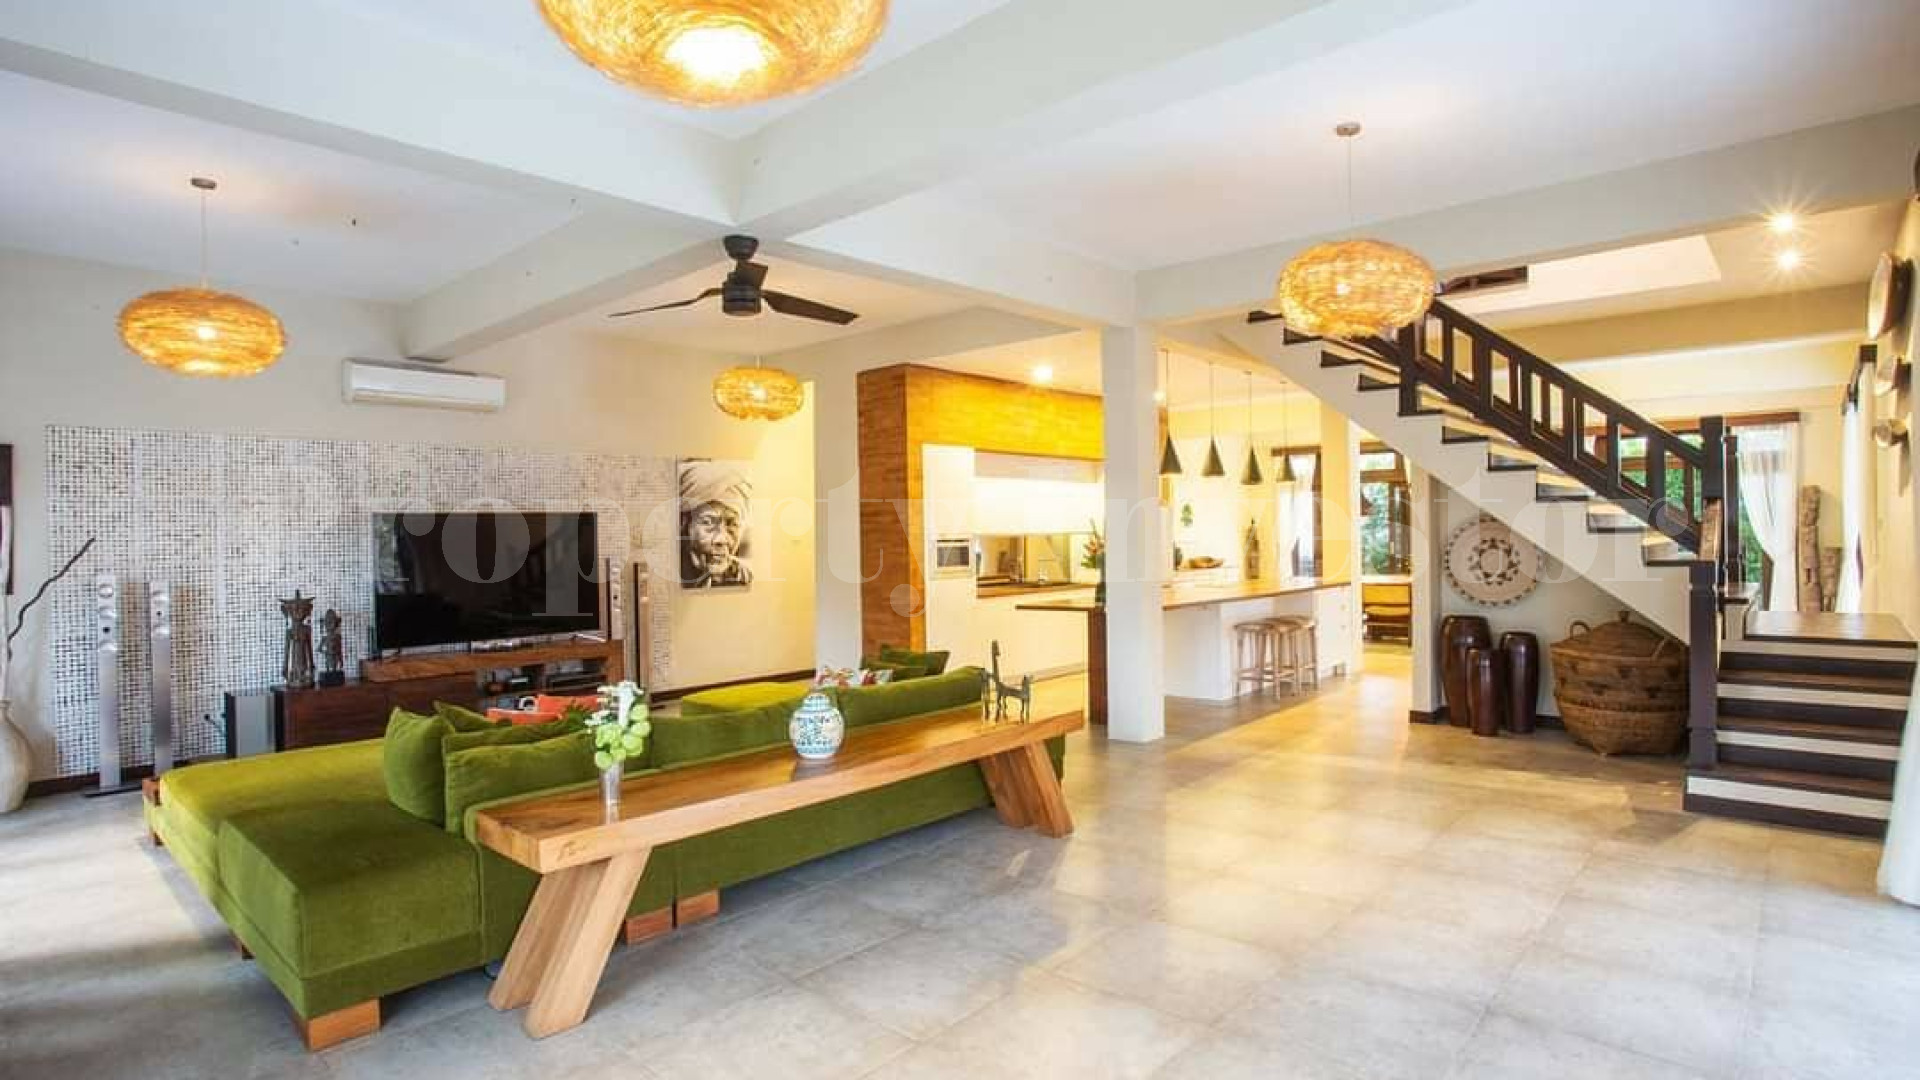 Spacious 7 Bedroom Contemporary Balinese Villa with Hotel License for Sale in Cemagi, Bali